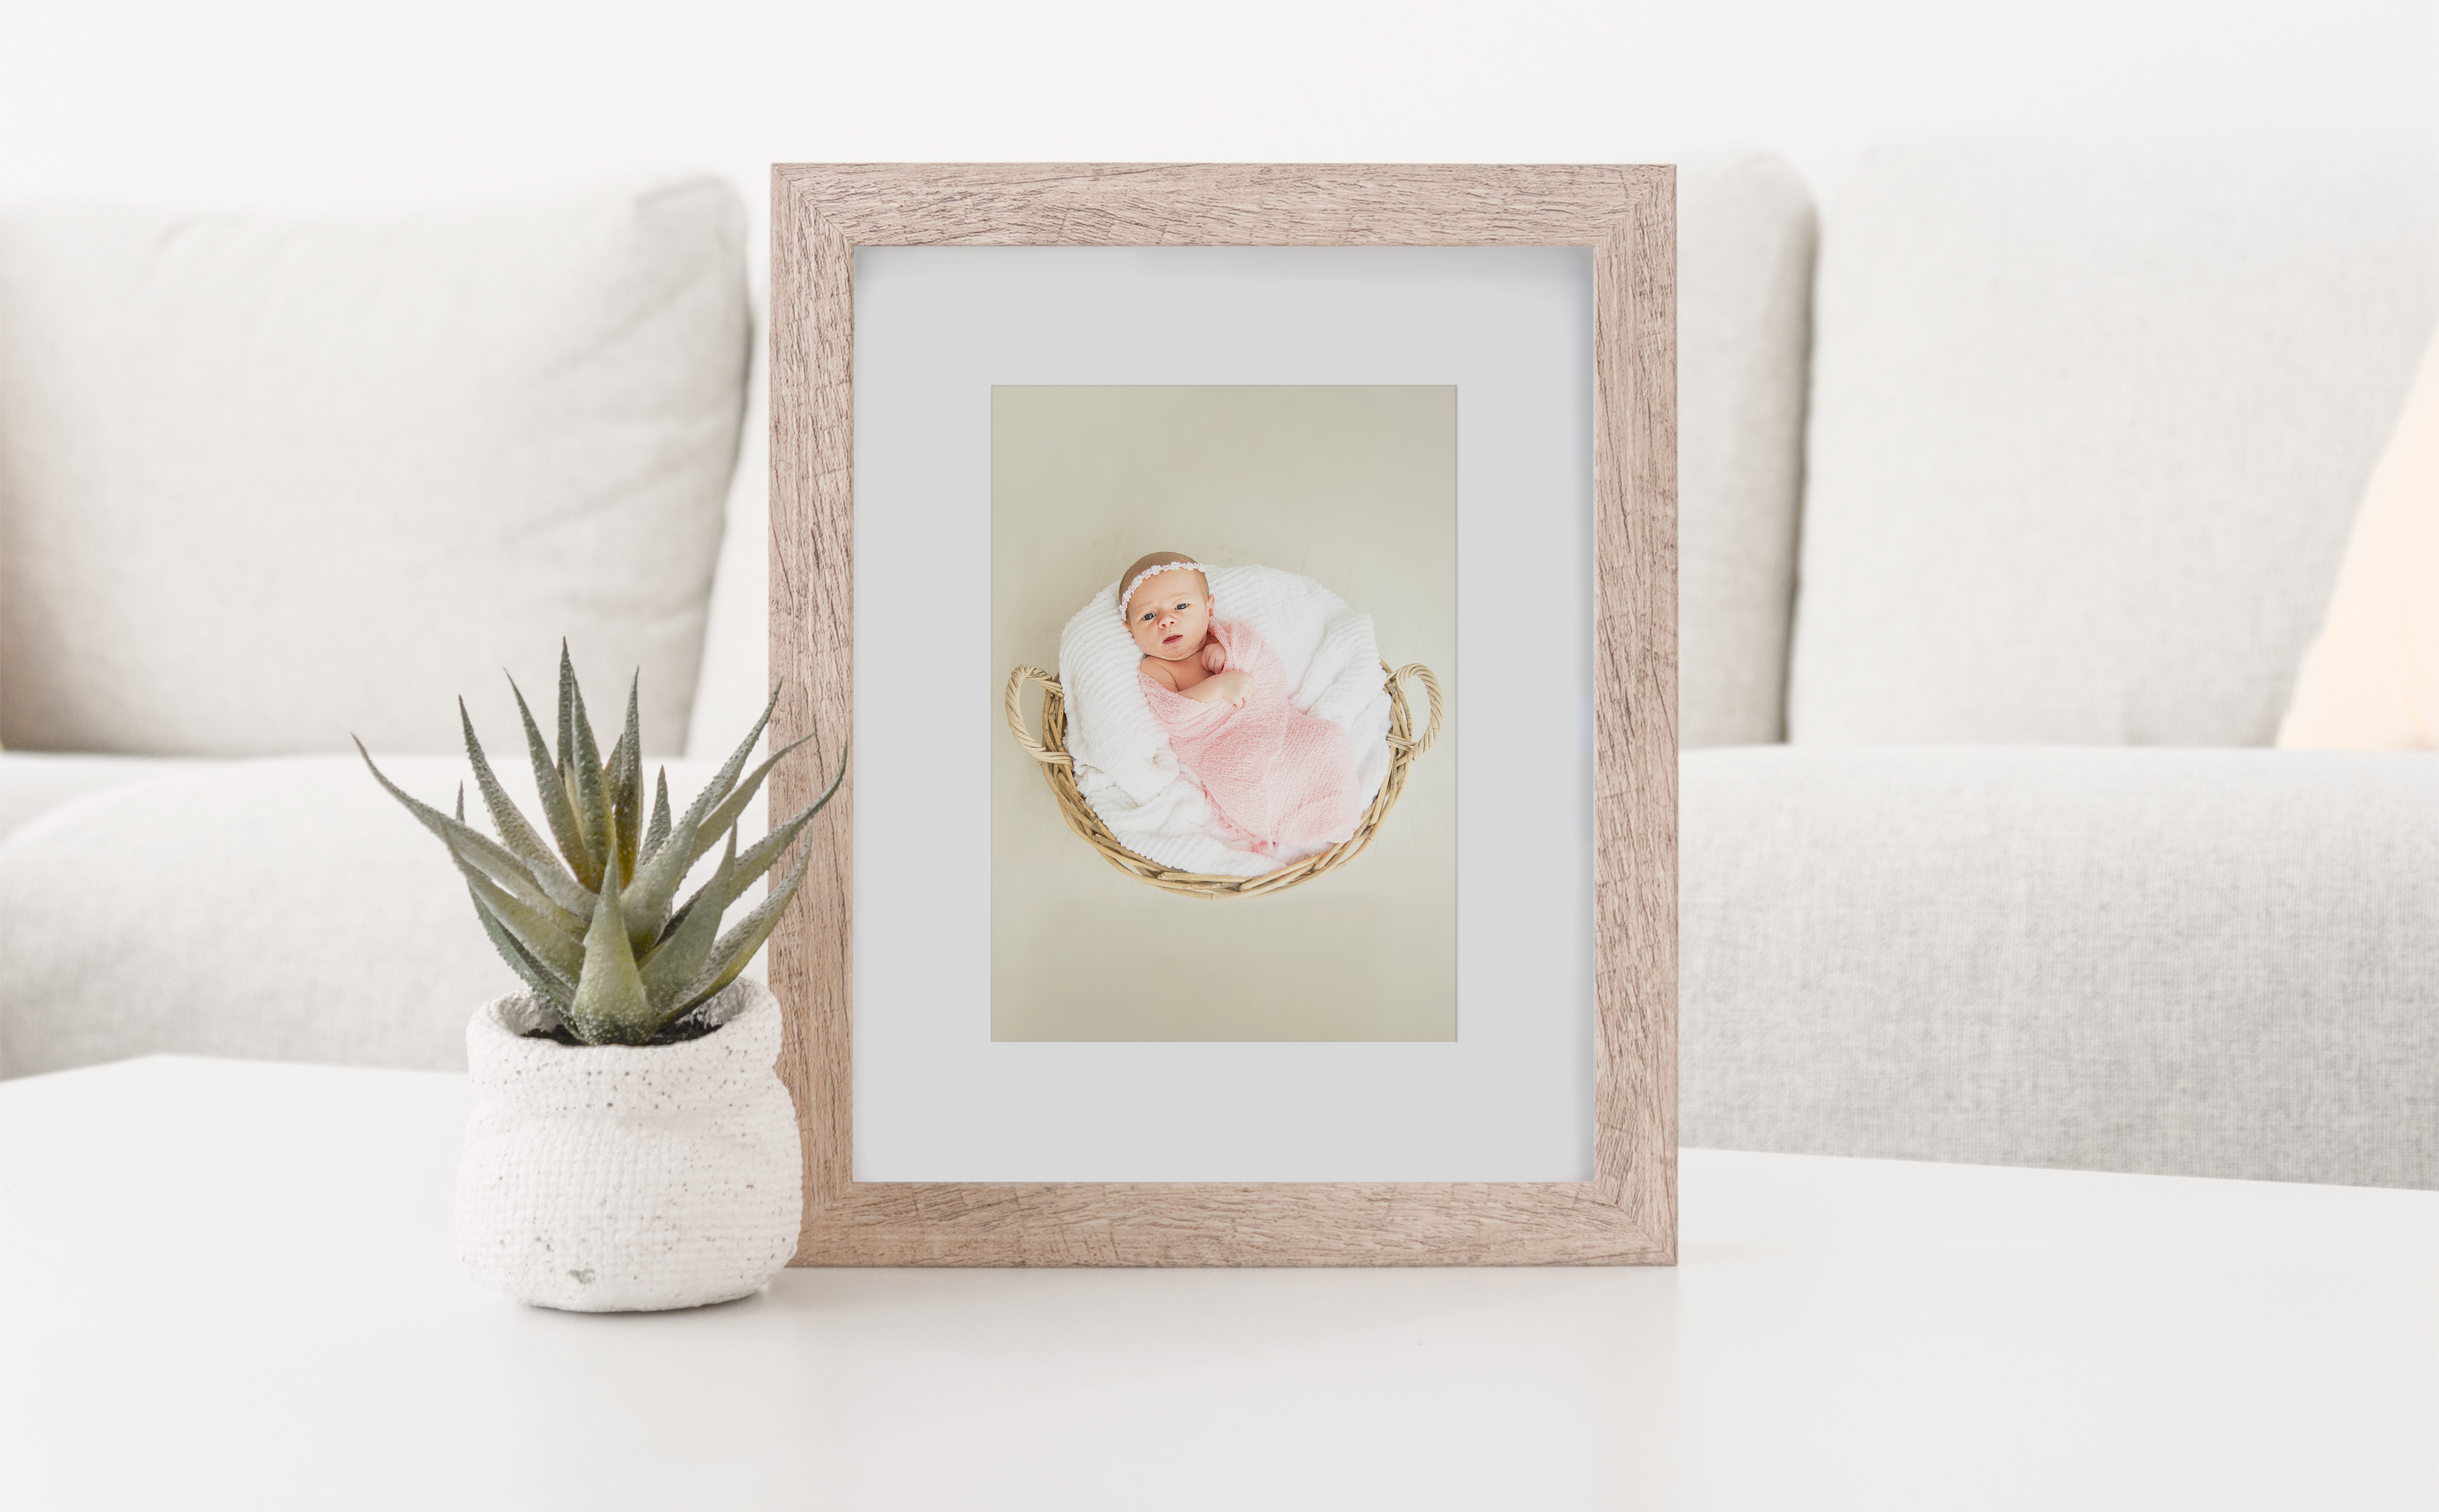 Baby frame for Mother's Day gift